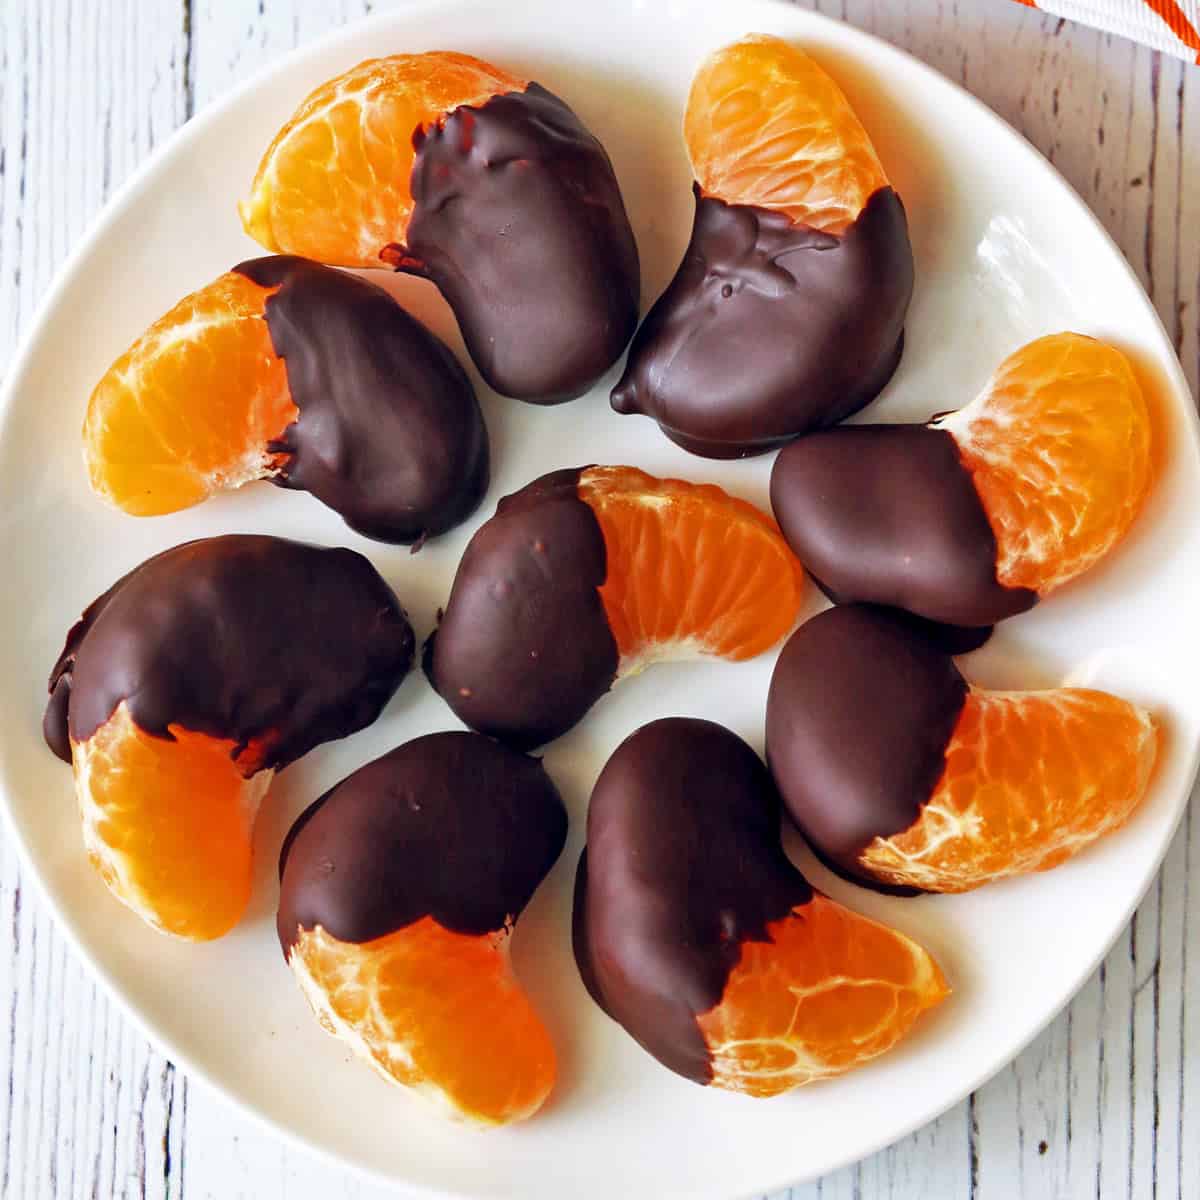 Chocolate-covered oranges are served on a white plate.